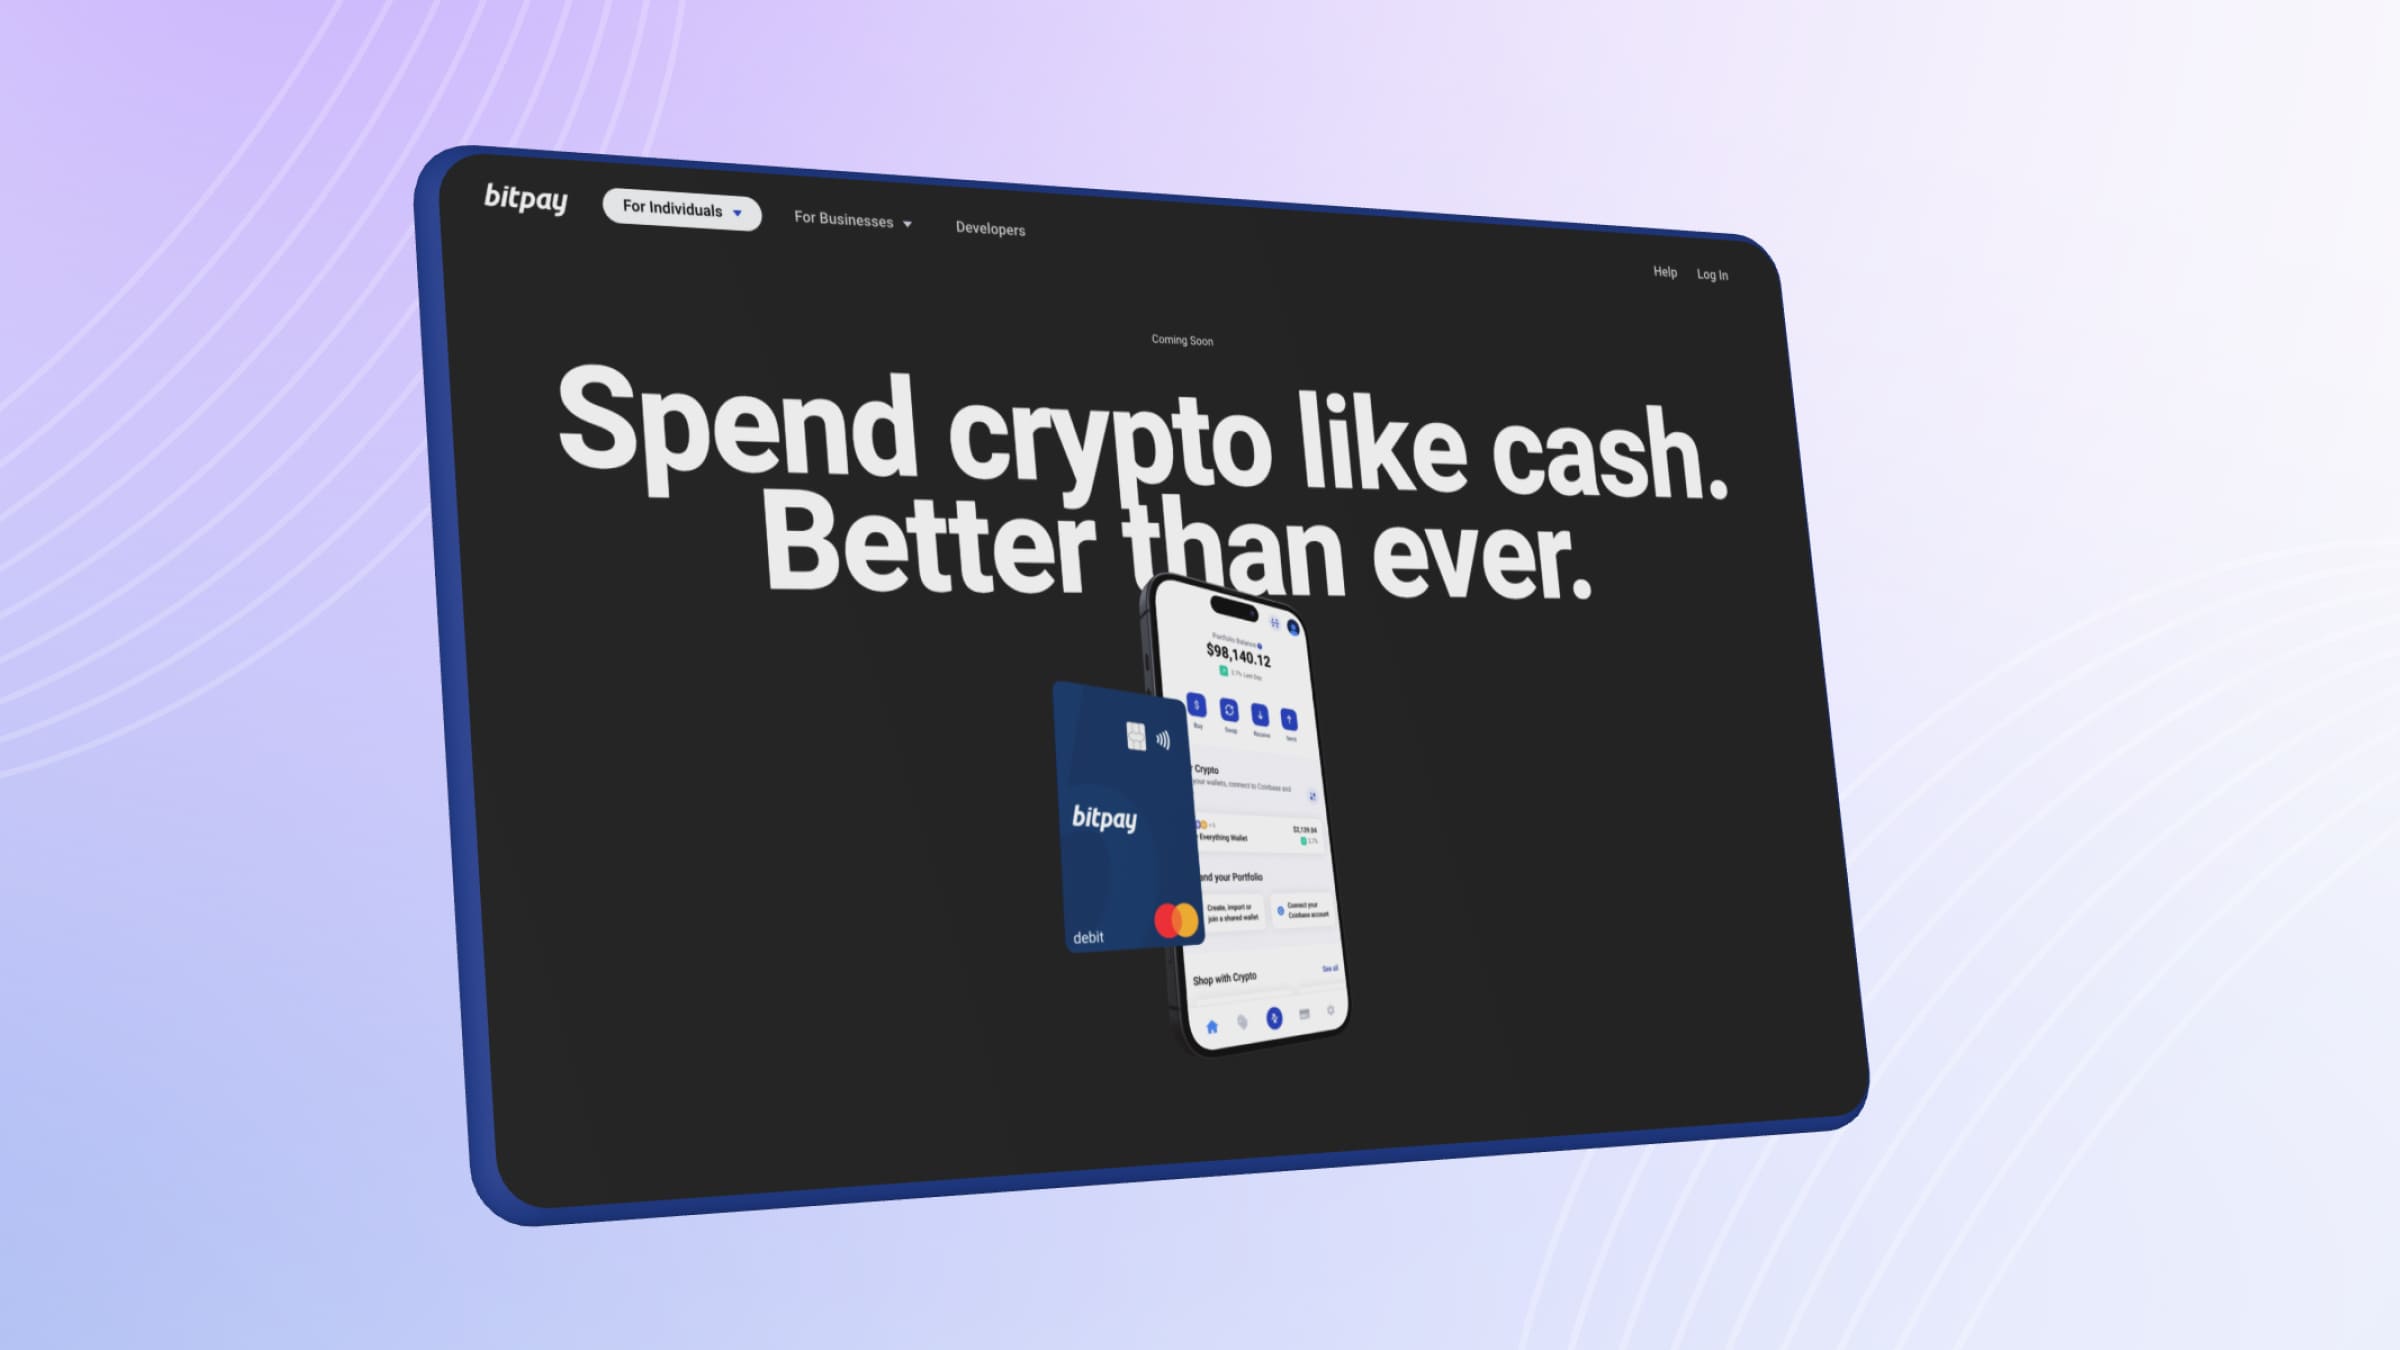 BitPay Cards are prepaid debit crypto cards that allow you to pay for everyday purchases.